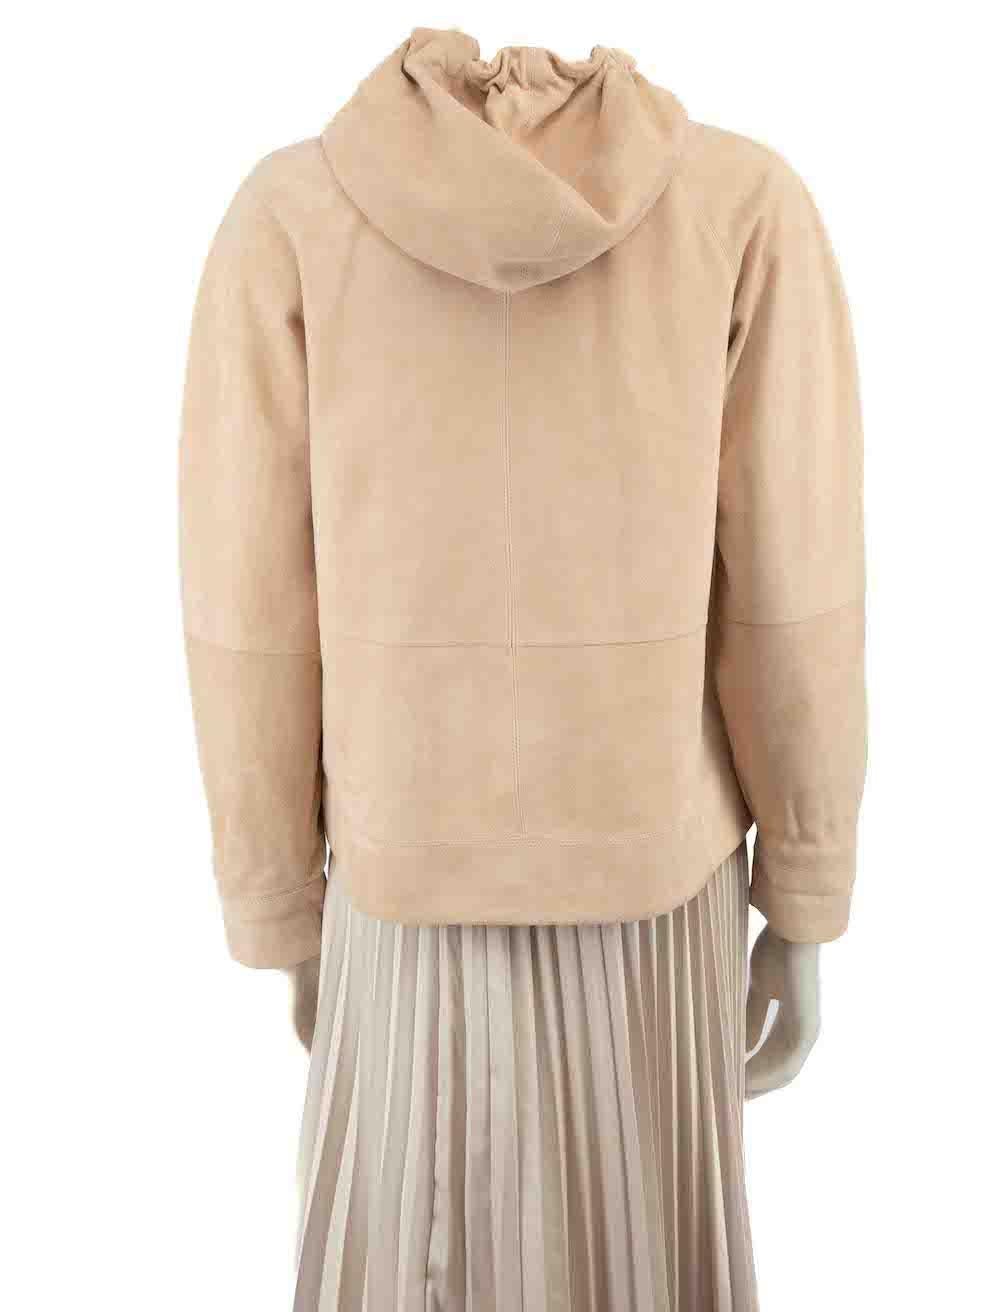 Brunello Cucinelli Light Pink Suede Hooded Jacket Size S In Good Condition For Sale In London, GB